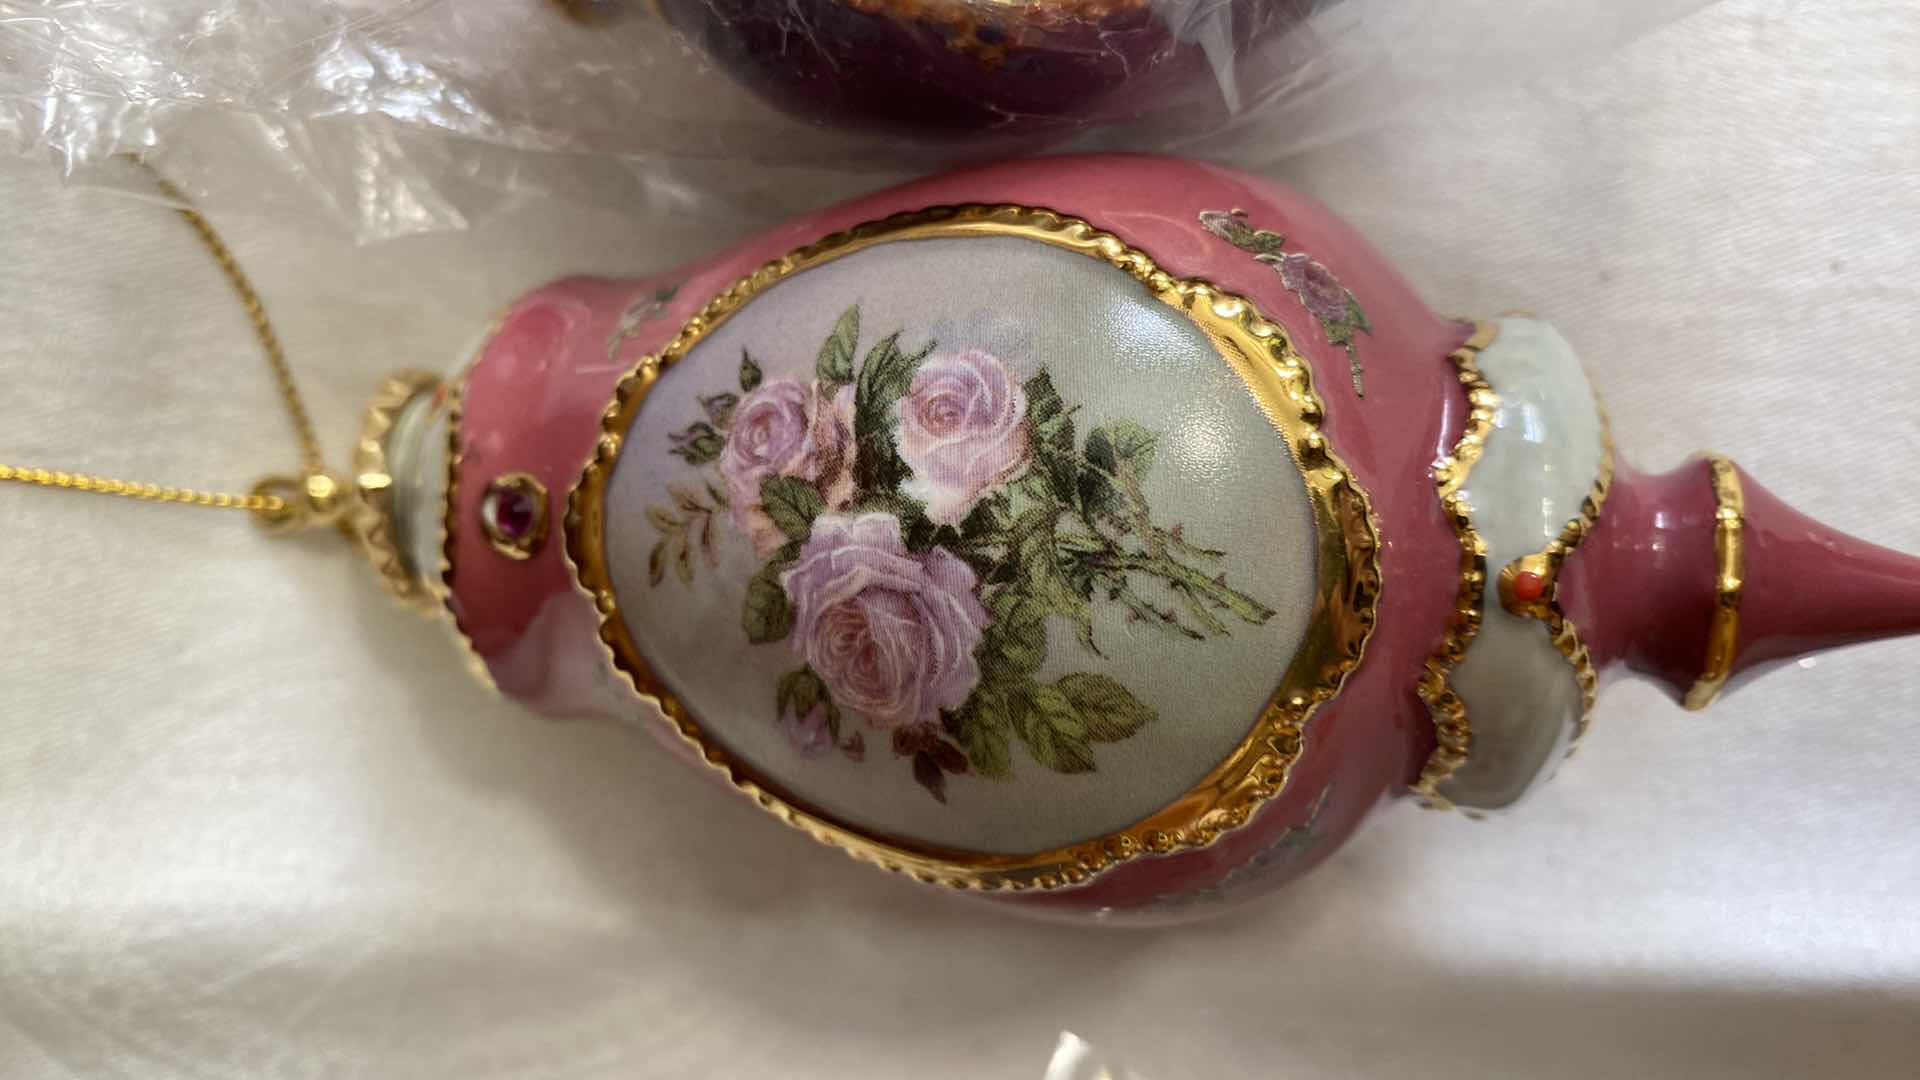 Photo 5 of VINTAGE THREE LENA LIU’s FOREVER FLOWERS PORCELAIN ORNAMENTS COLLECTIBLES BY BRADFORD EXCHANGE WITH CERTIFICATE OF AUTHENTICITY